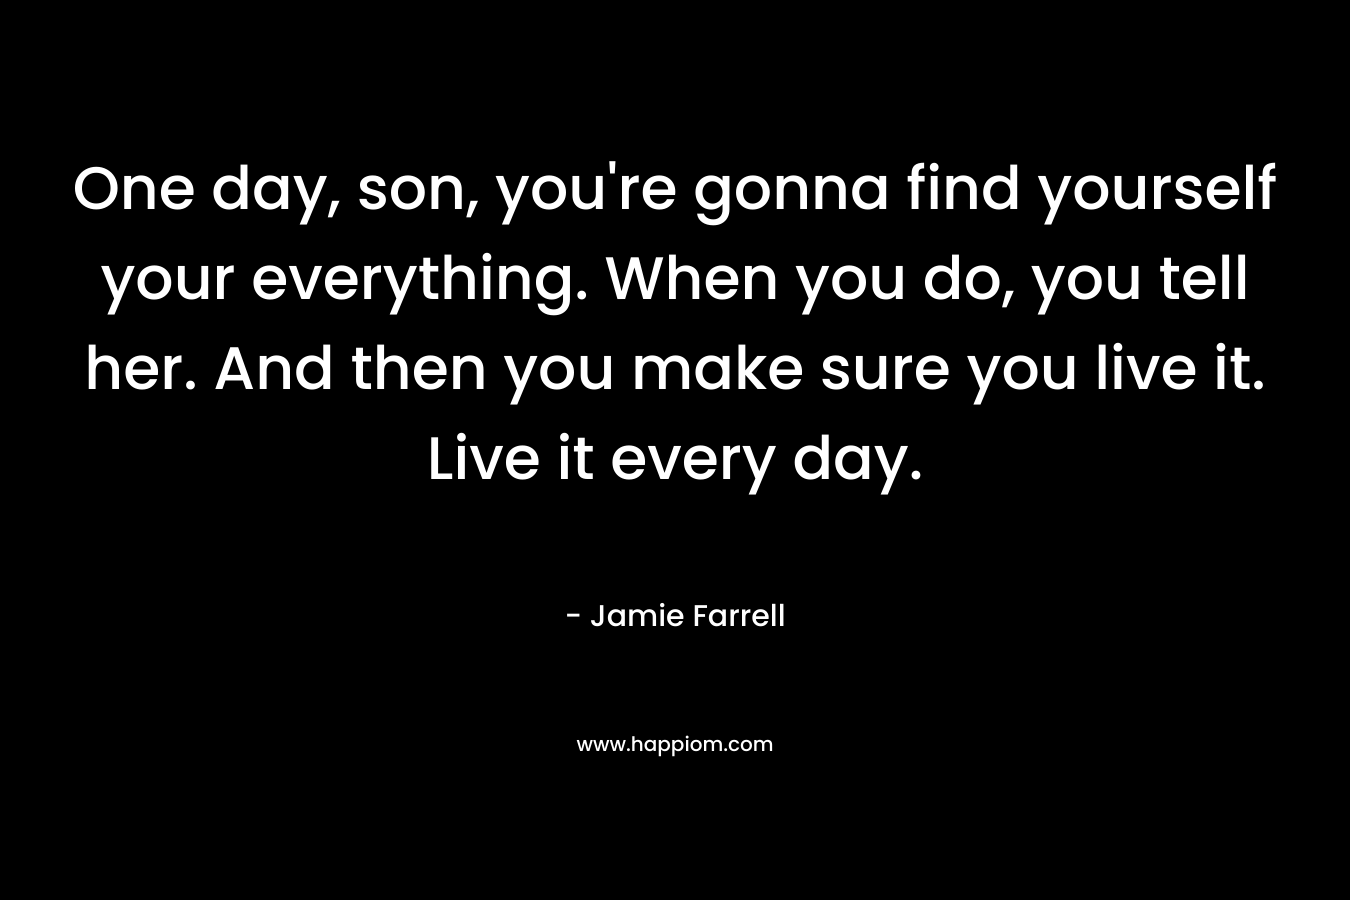 One day, son, you're gonna find yourself your everything. When you do, you tell her. And then you make sure you live it. Live it every day.